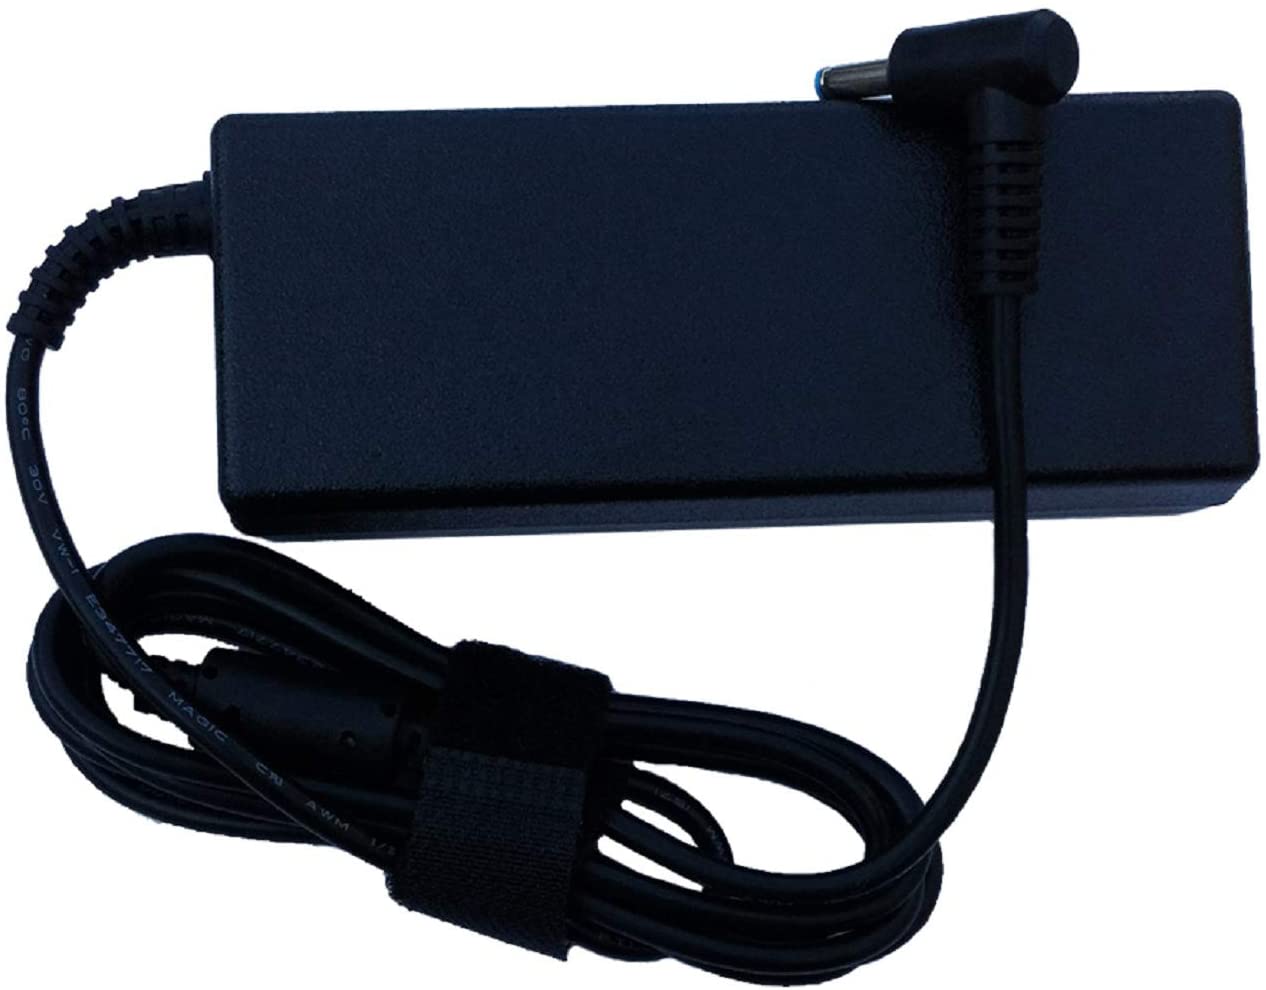 UPBRIGHT NEW AC / DC Adapter For HP 15-r006tu 15-r017tu 15-r020ns 15-r002tu 15-r003tu 15-r004tu 15-r006tu 15-r017tu 15-r020ns 15.6" Laptop Notebook Computers Battery Charger Power Supply Cord Cable PS - image 2 of 3